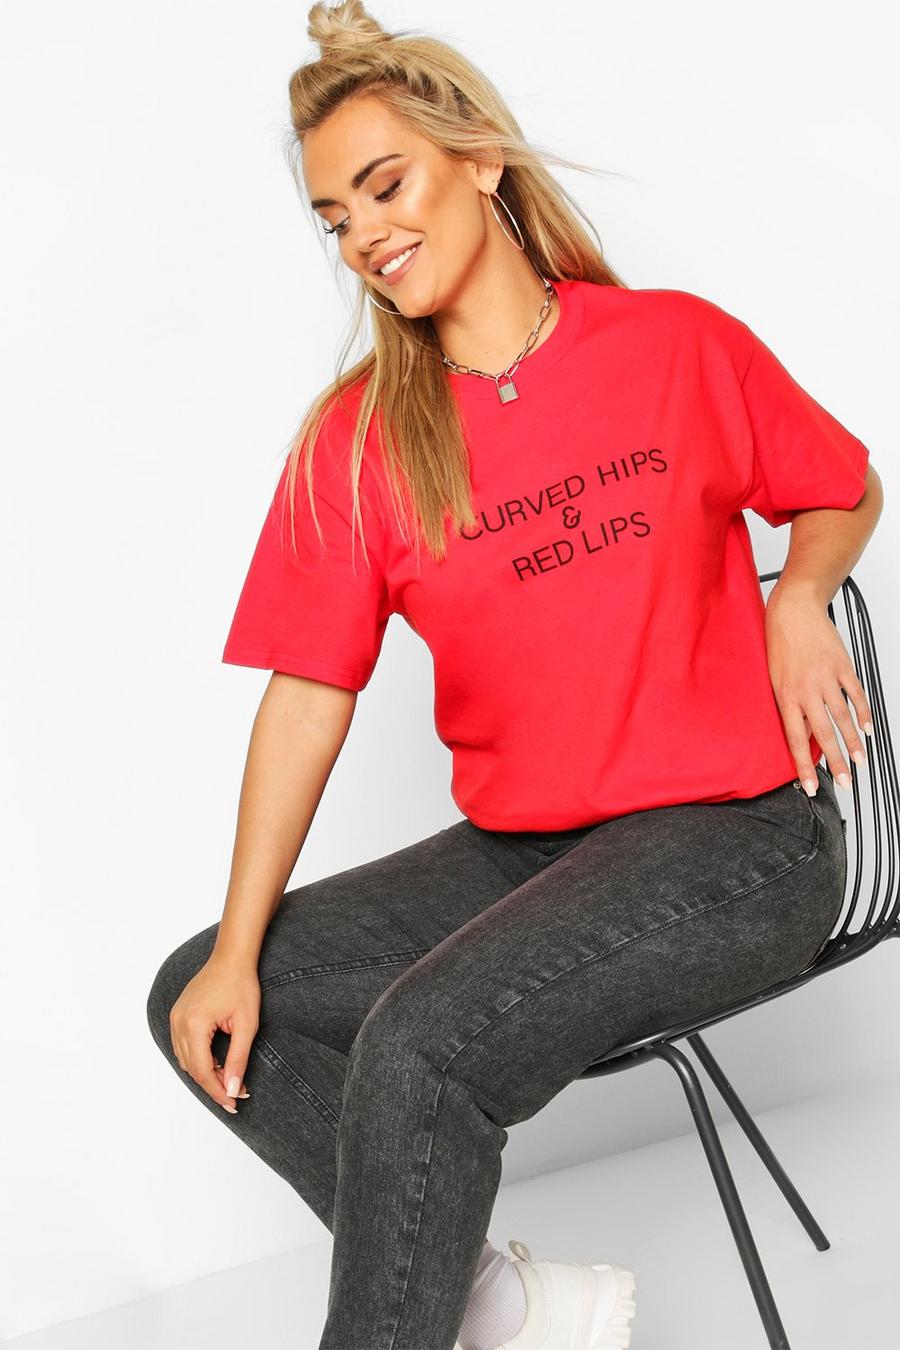 Plus Curved Hips & Red Lips Slogan T-shirt image number 1